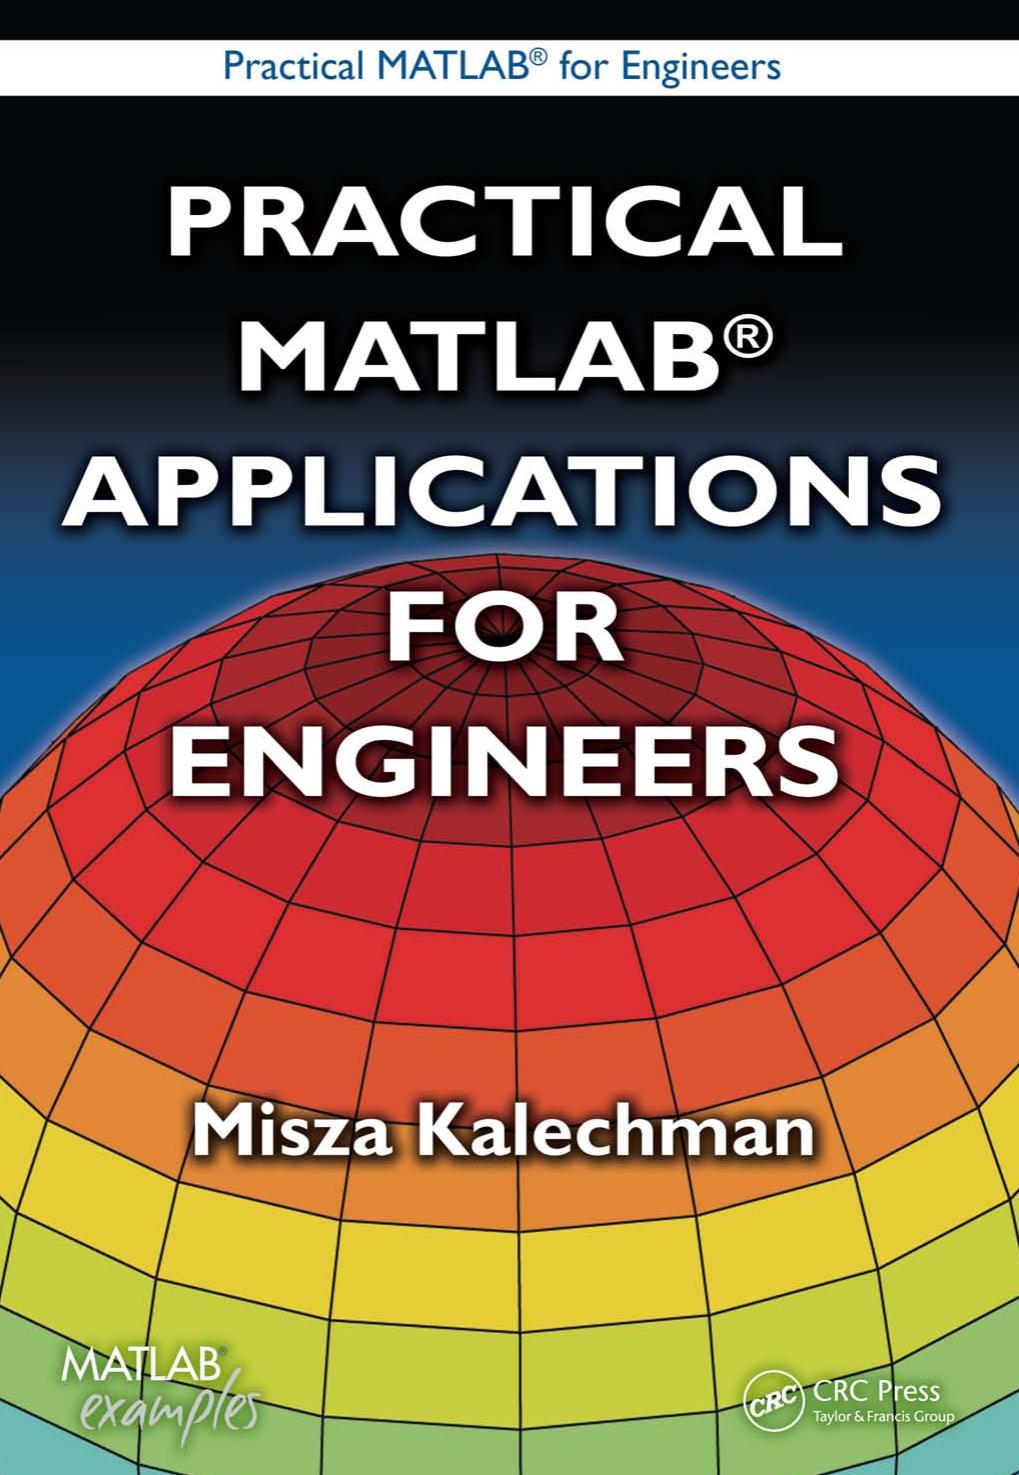 PRACTICAL MATLAB® FOR ENGINEERS 2009.pdf